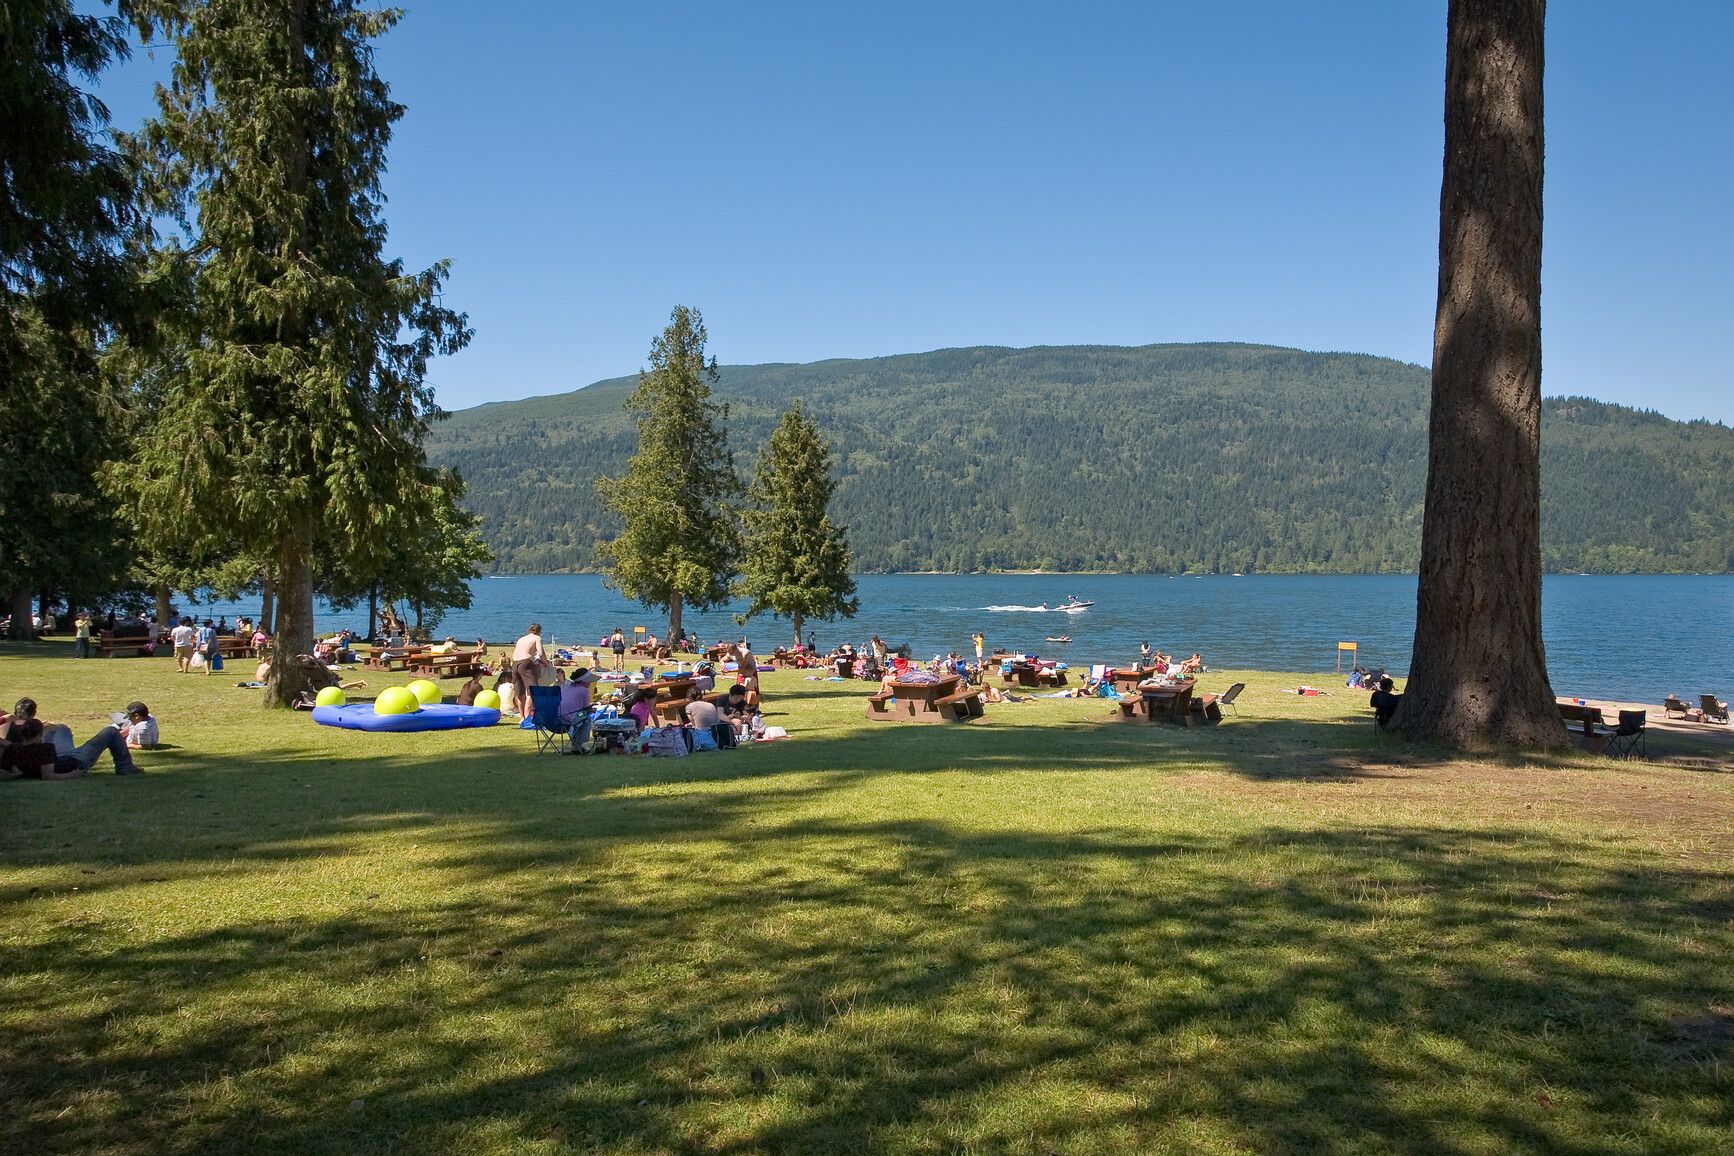 Park visitors enjoying the day-use area in Cultus Lake Park.